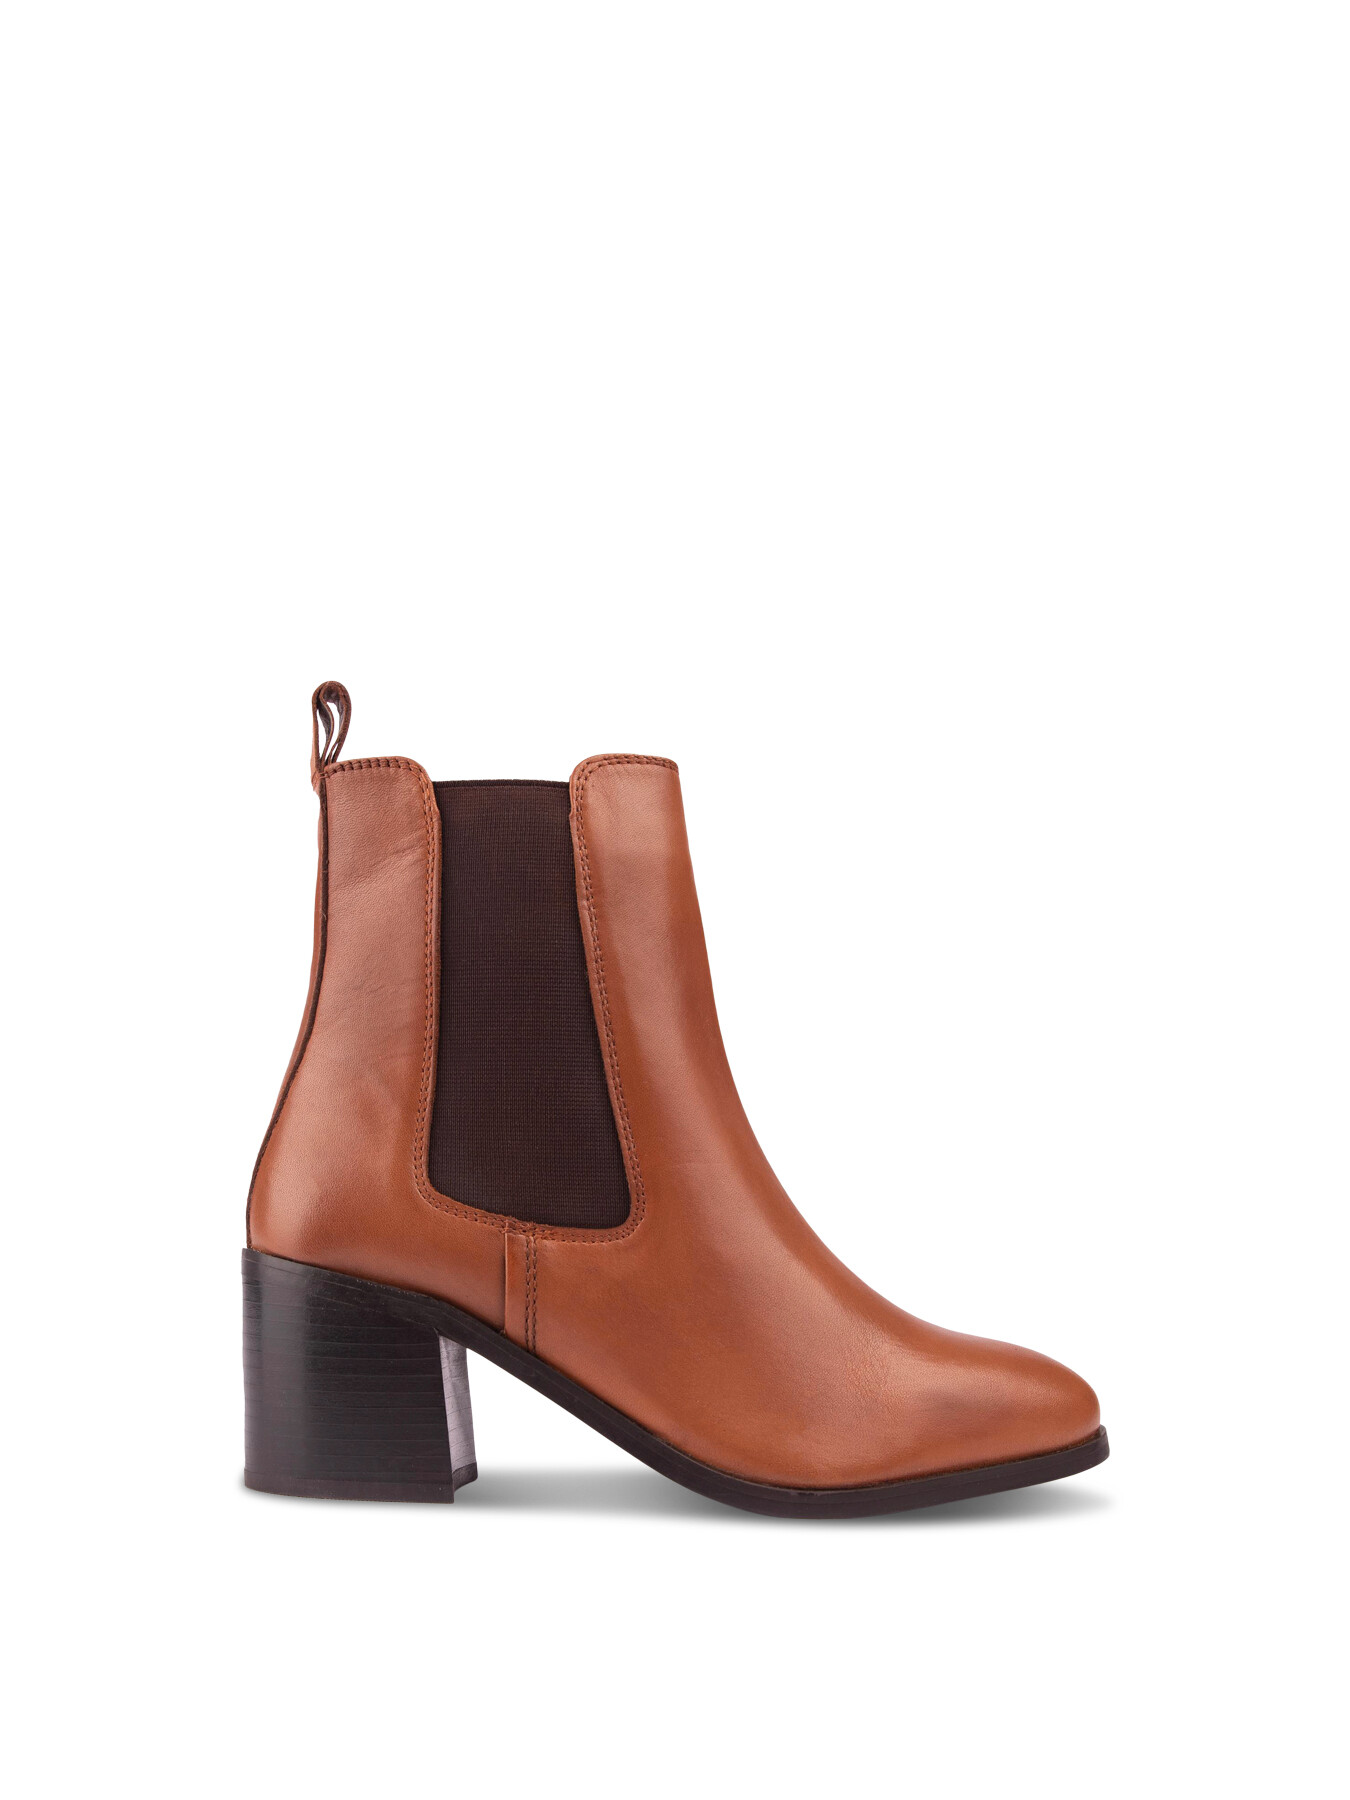 Sole Women's  Galax Chelsea Boots